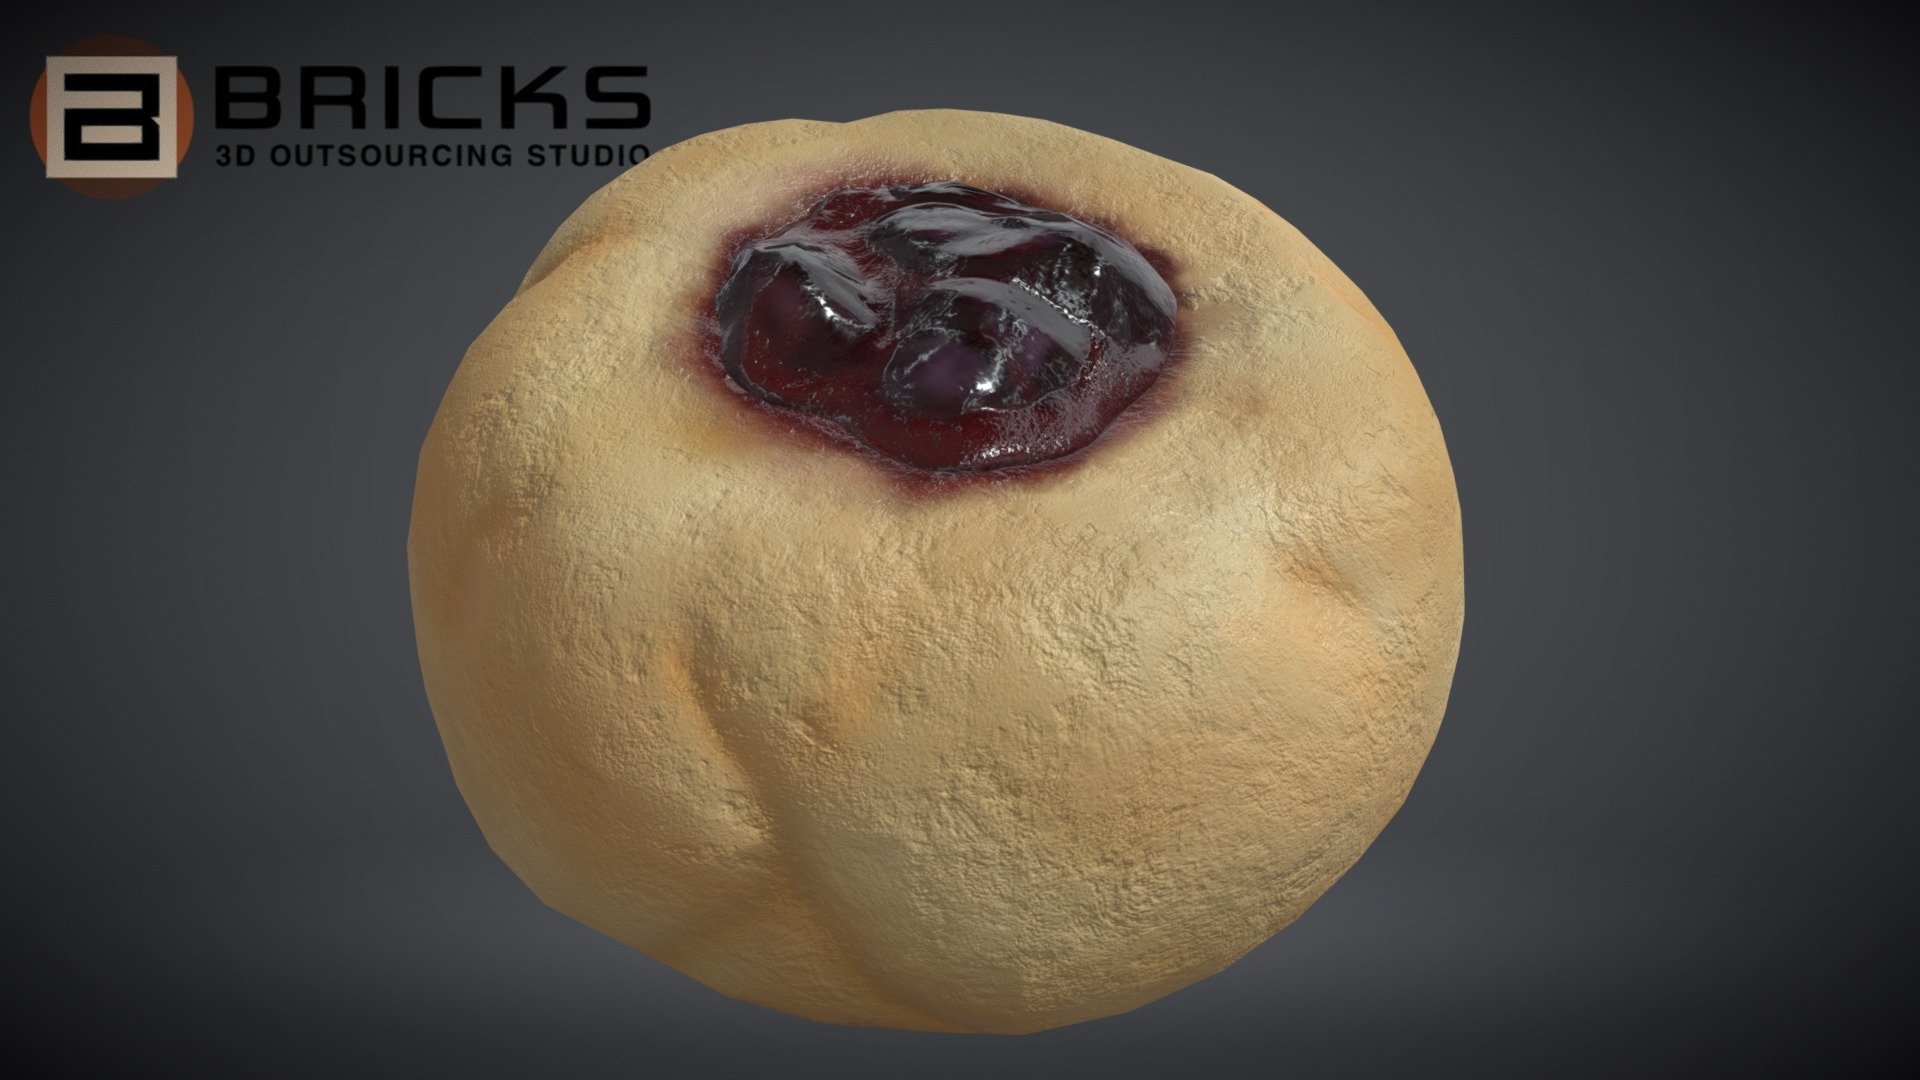 PBR Food Asset:
CranberryThumbprintCookie
Polycount: 1240
Vertex count: 716
Texture Size: 2048px x 2048px
Normal: OpenGL

If you need any adjust in file please contact us: team@bricks3dstudio.com

Hire us: tringuyen@bricks3dstudio.com
Here is us: https://www.bricks3dstudio.com/
        https://www.artstation.com/bricksstudio
        https://www.facebook.com/Bricks3dstudio/
        https://www.linkedin.com/in/bricks-studio-b10462252/ - CranberryThumbprint Cookie - Buy Royalty Free 3D model by Bricks Studio (@bricks3dstudio) 3d model